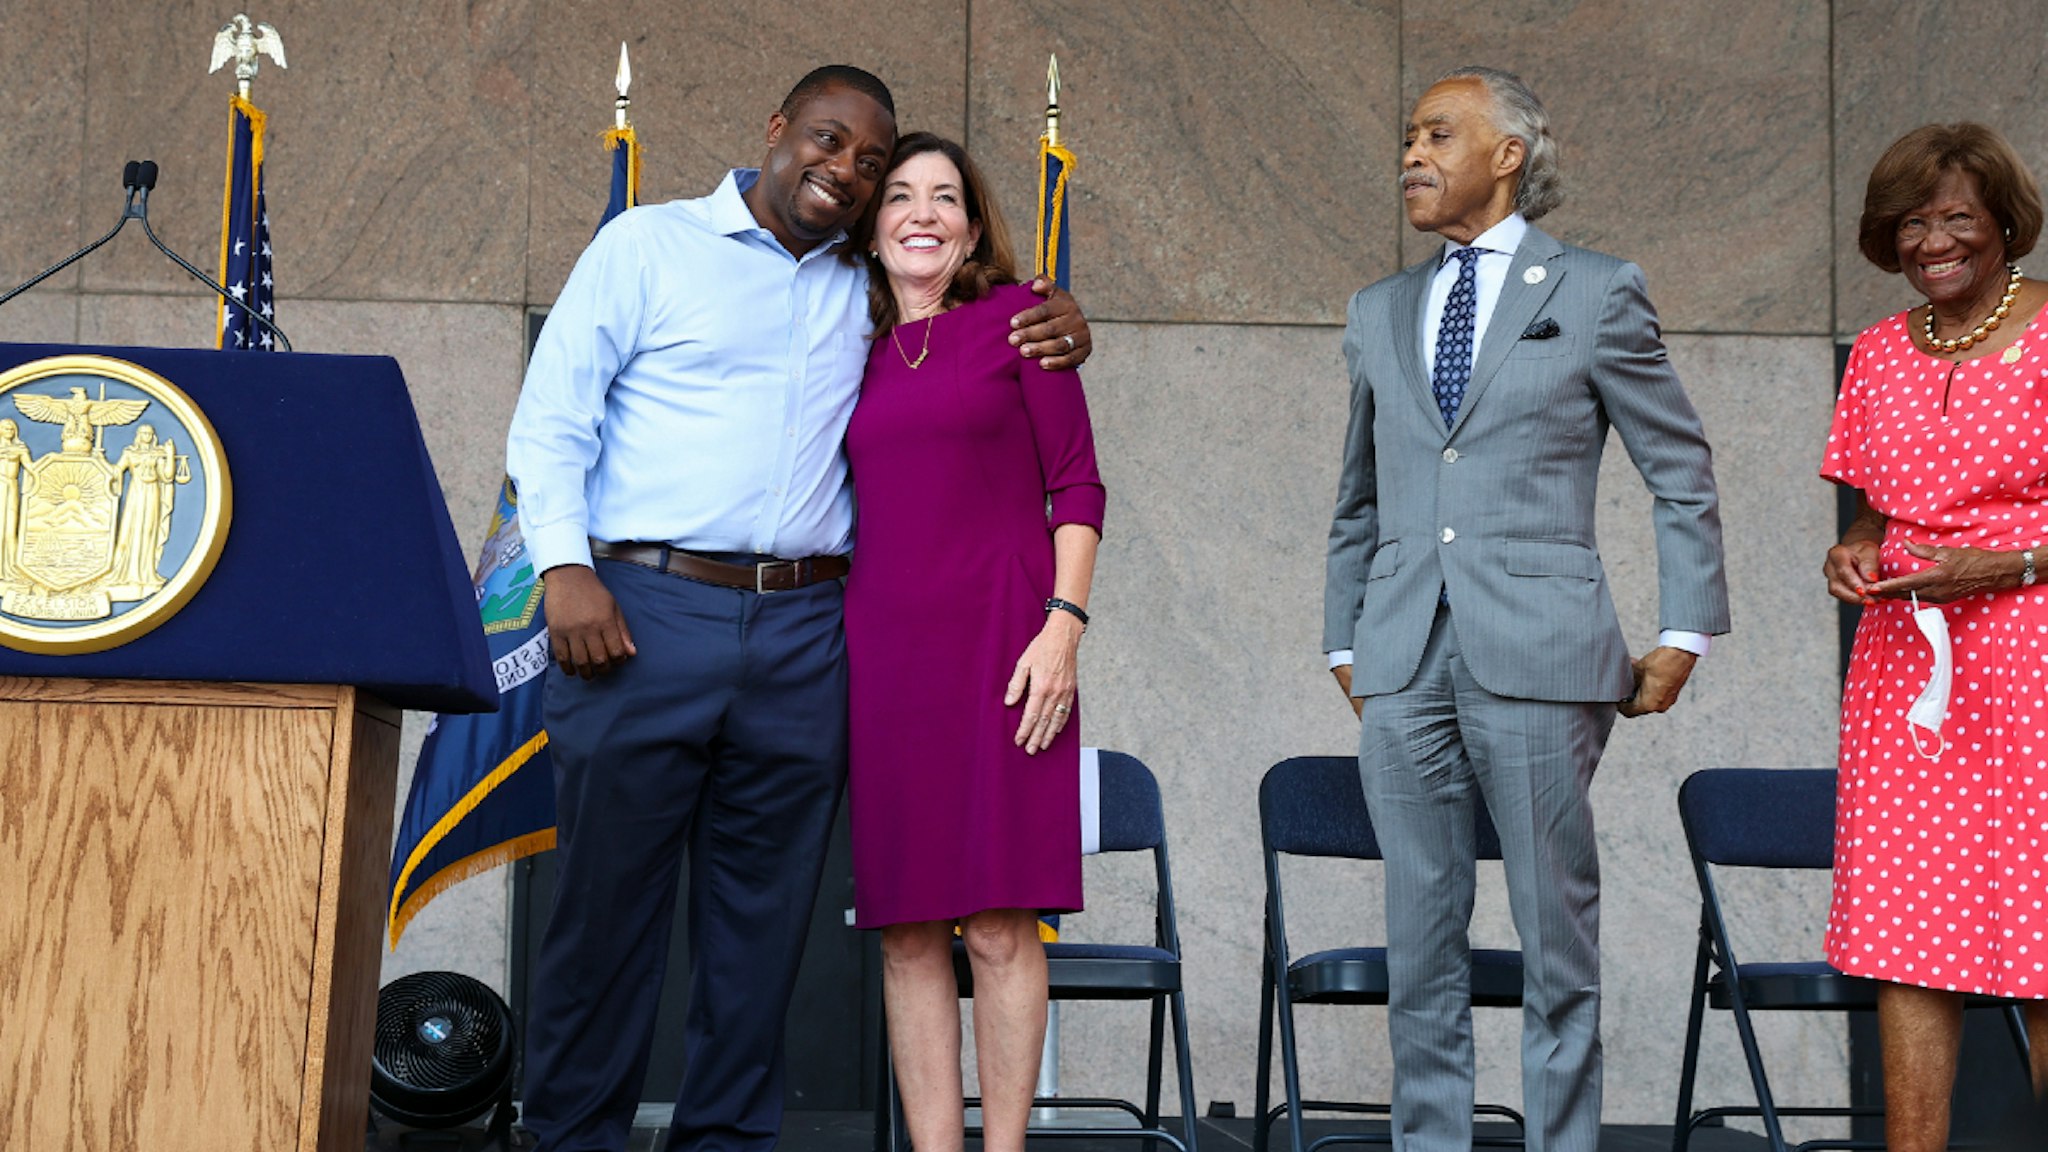 NEW YORK, NY - AUGUST 26: New York Governor Kathy Hochul (2nd L), American civil rights activist Al Sharpton (2nd R) and US Senator Brian Benjamin (L) are seen after speaking in front of the State office building in the hearth of Harlem, New York City, United States on August 26, 2021.